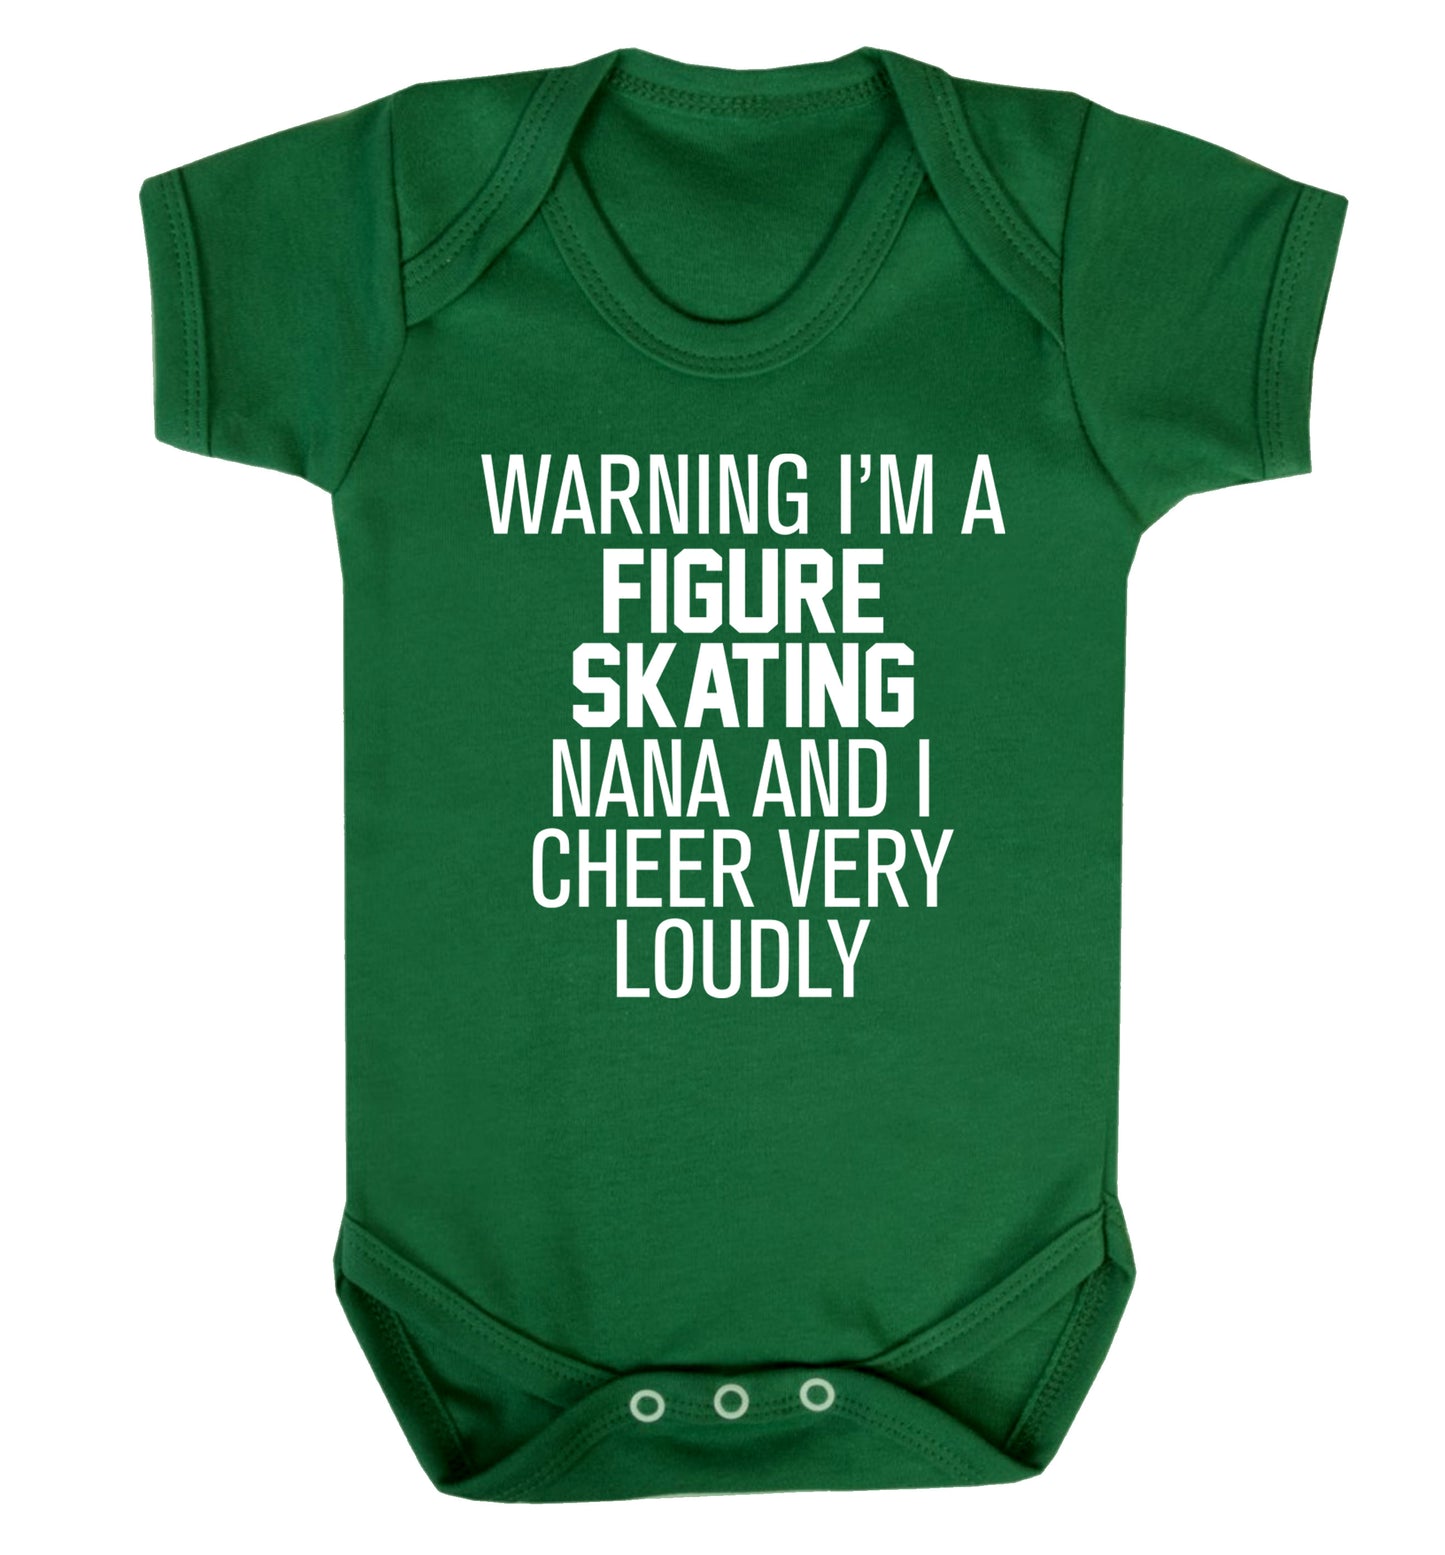 Warning I'm a figure skating nana and I cheer very loudly Baby Vest green 18-24 months